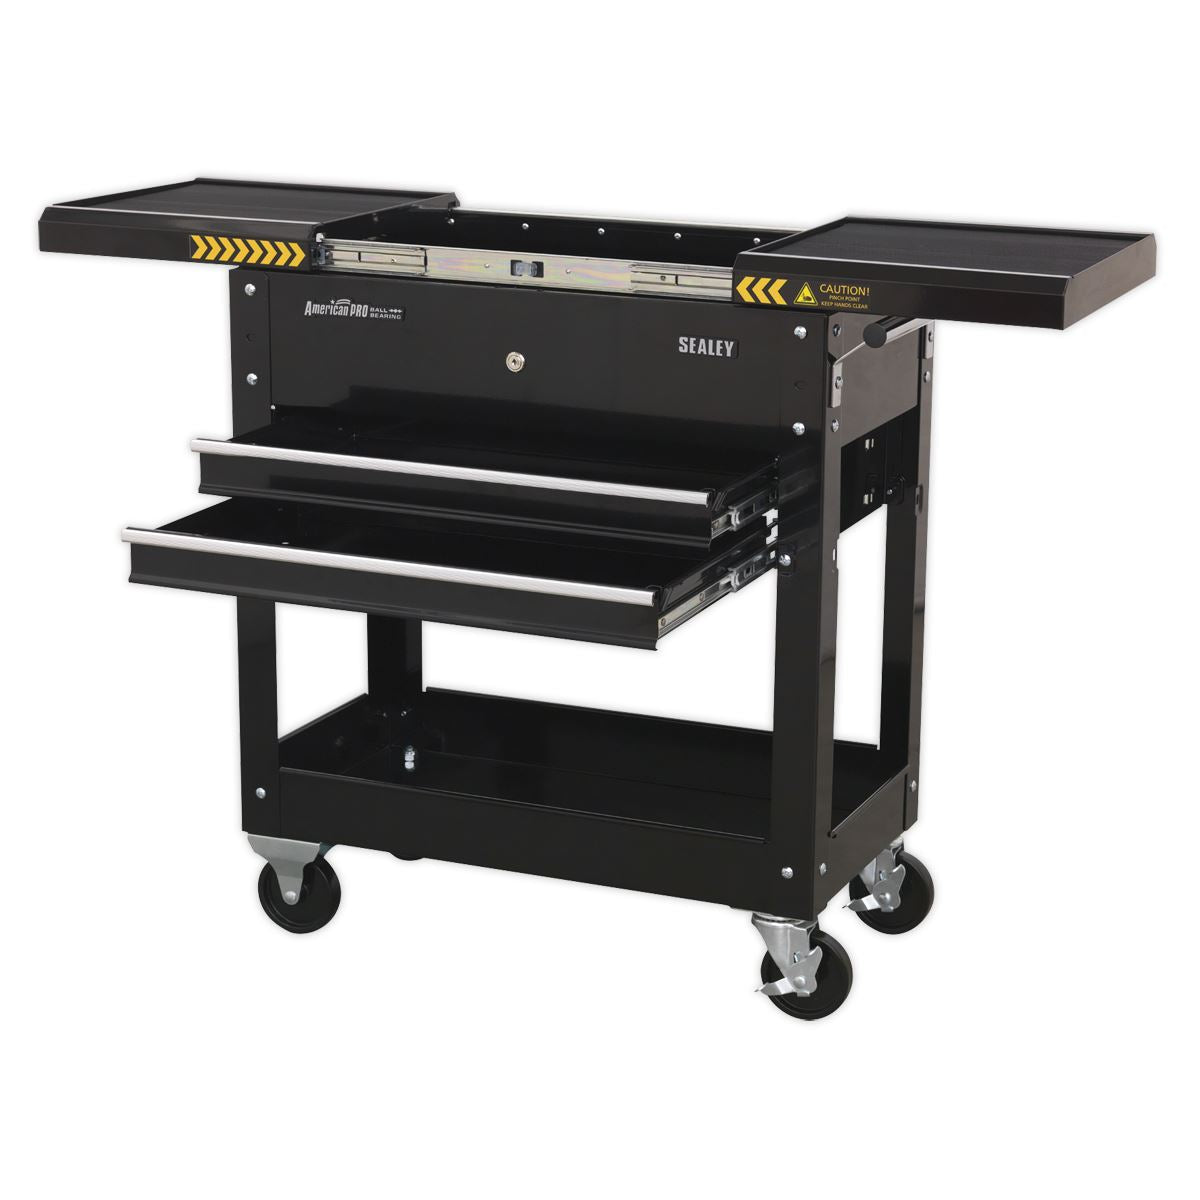 Sealey American Pro Mobile Tool & Parts Trolley - Black